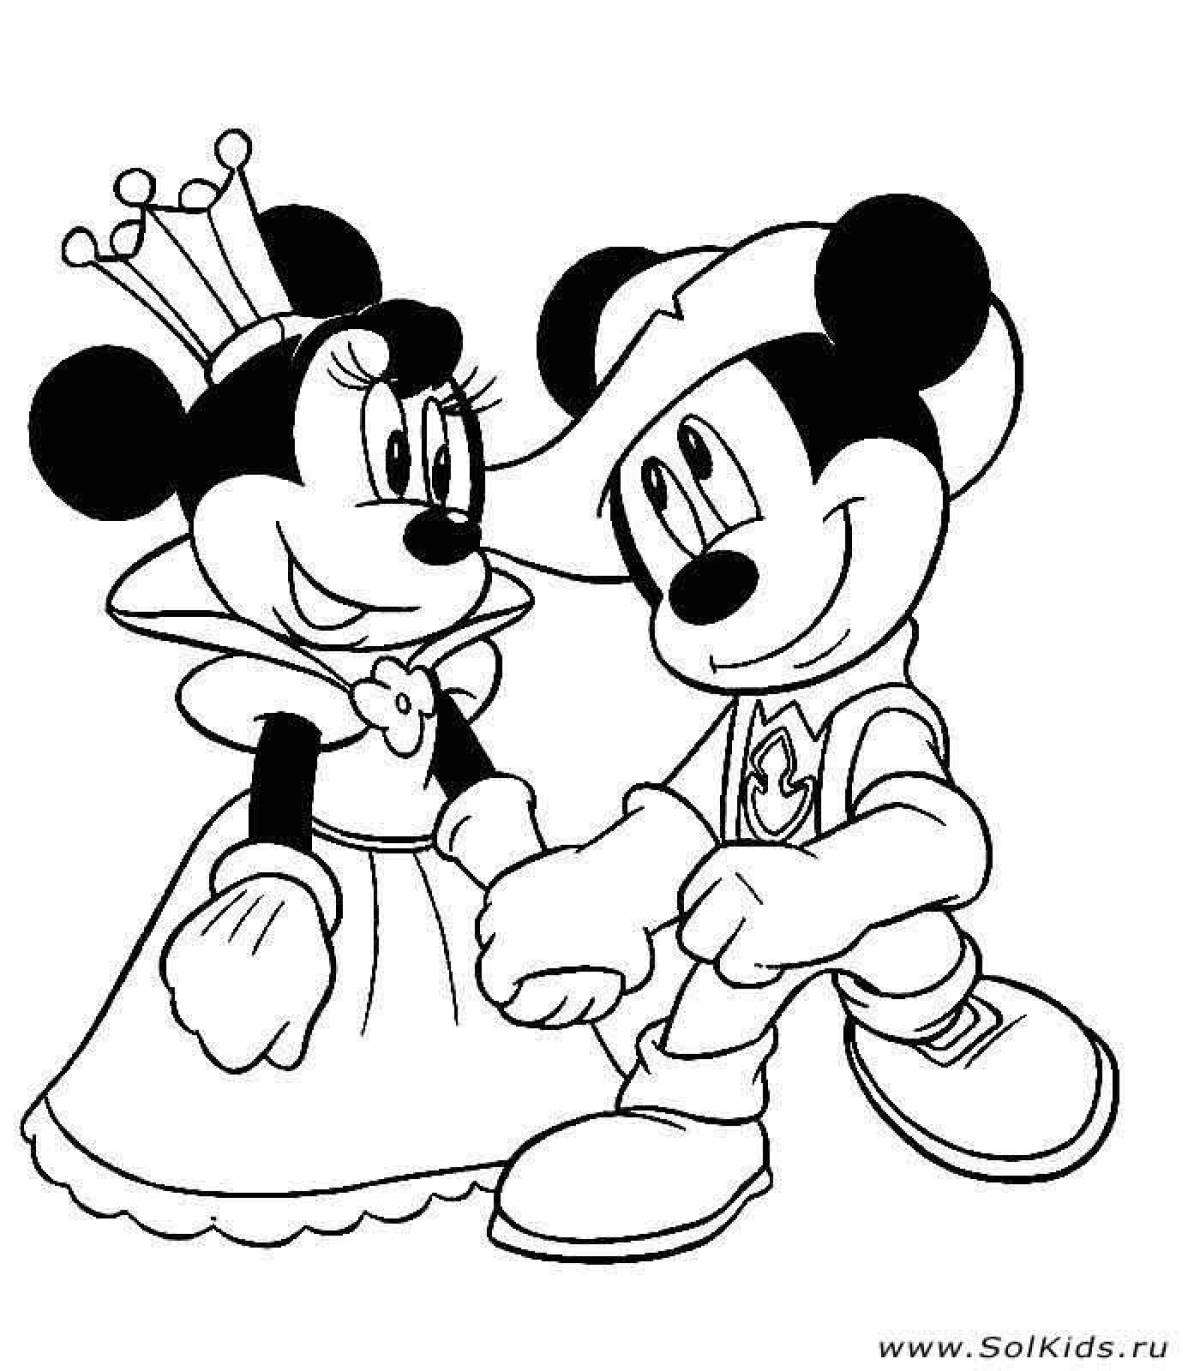 Adorable mickey mouse coloring page